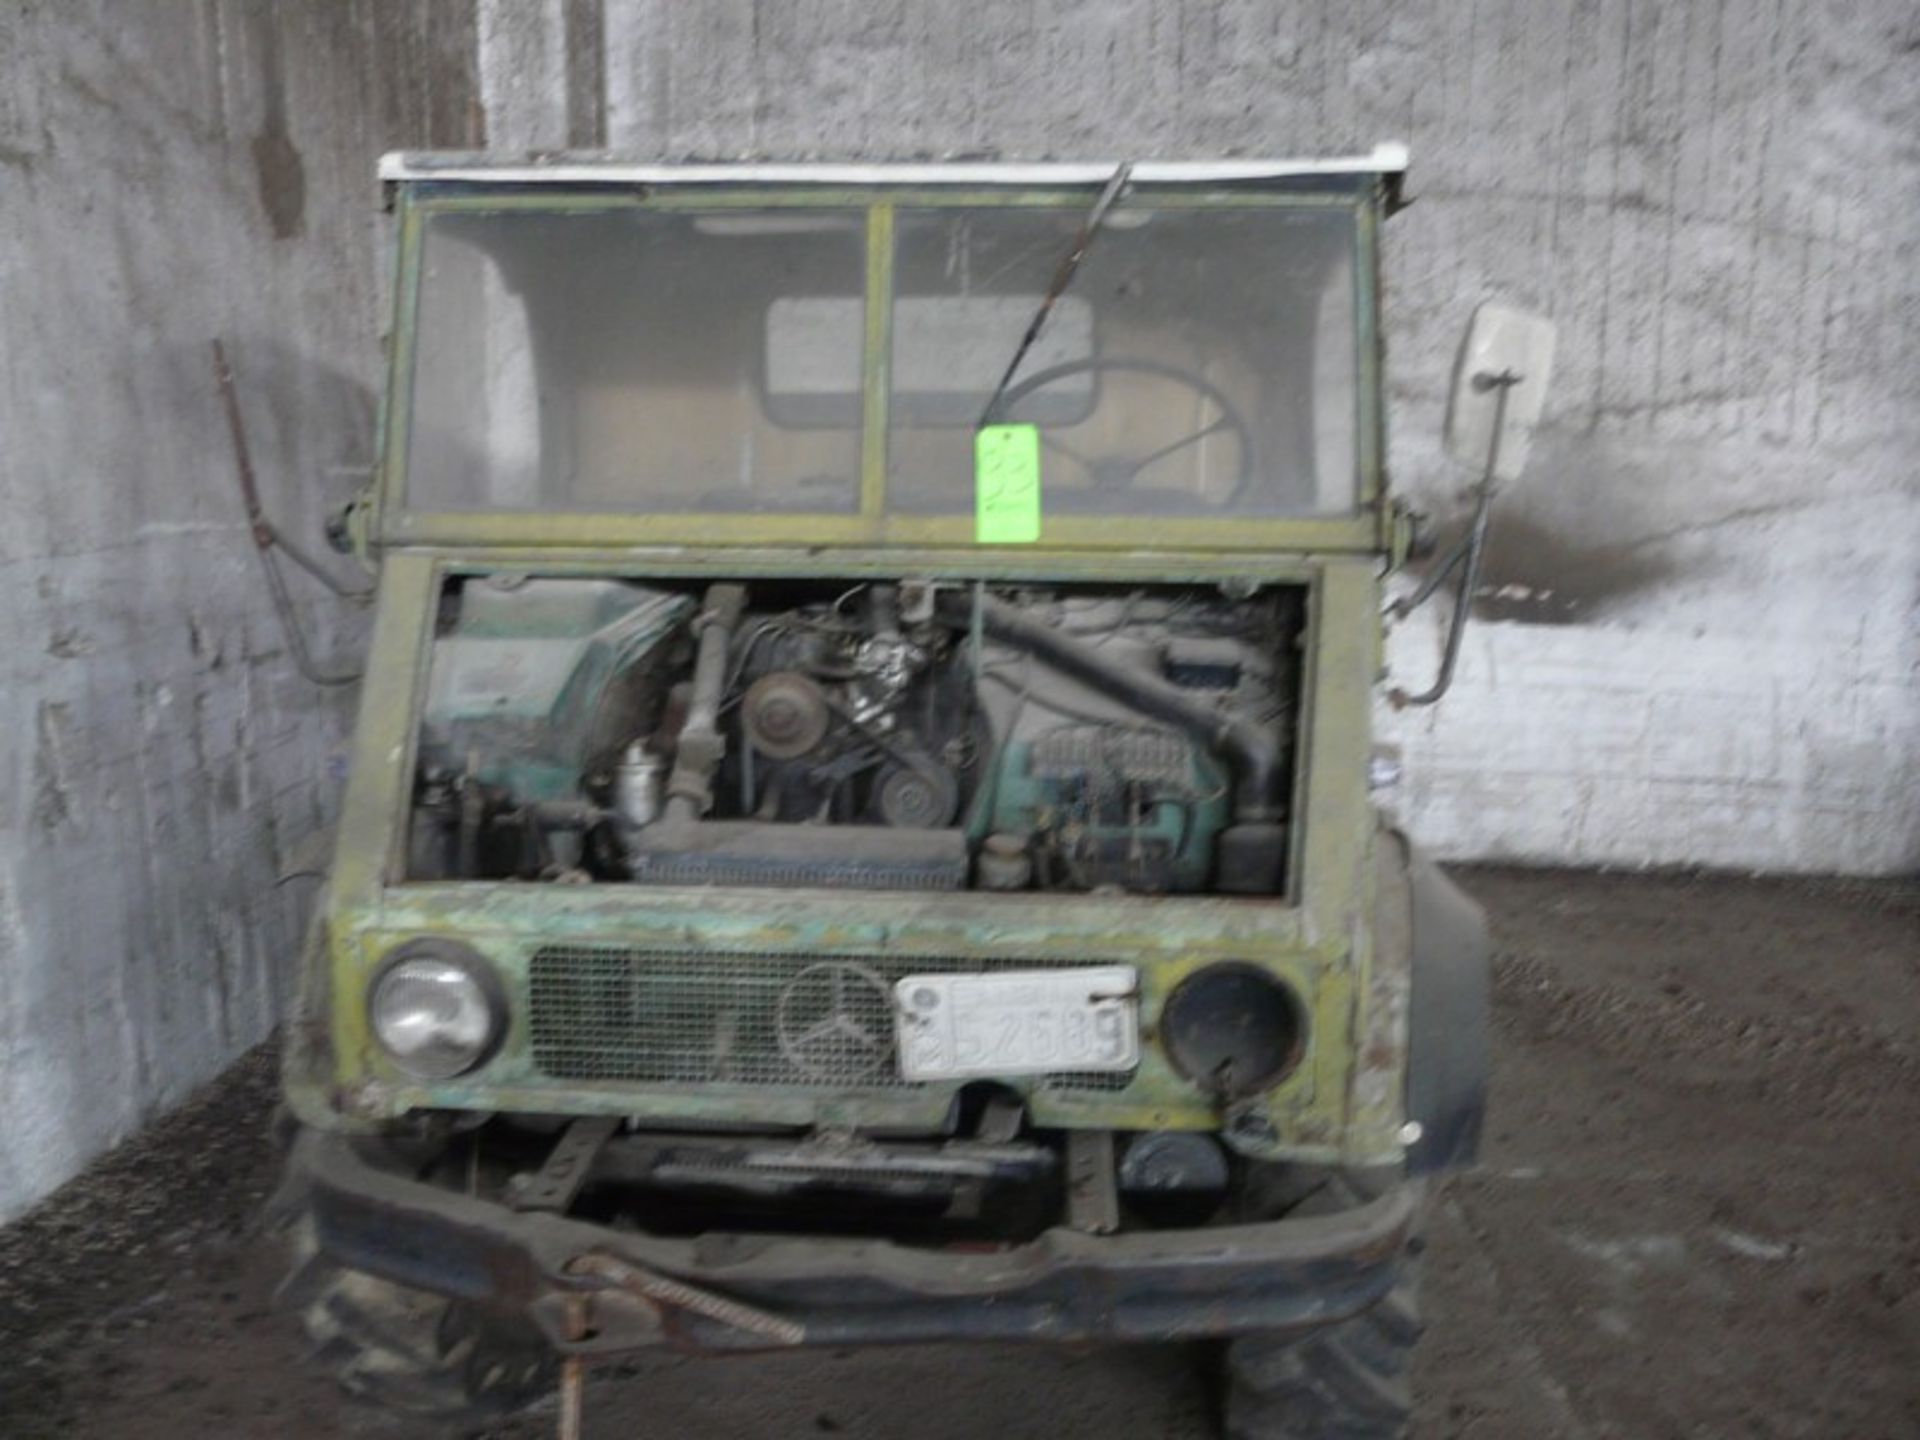 UNIMOG ,REG AM 52689,KM 42578,STOPED,MISSING DRIVERS DOOR , AND ENGINE COVER,METAL PULL TRUCK (